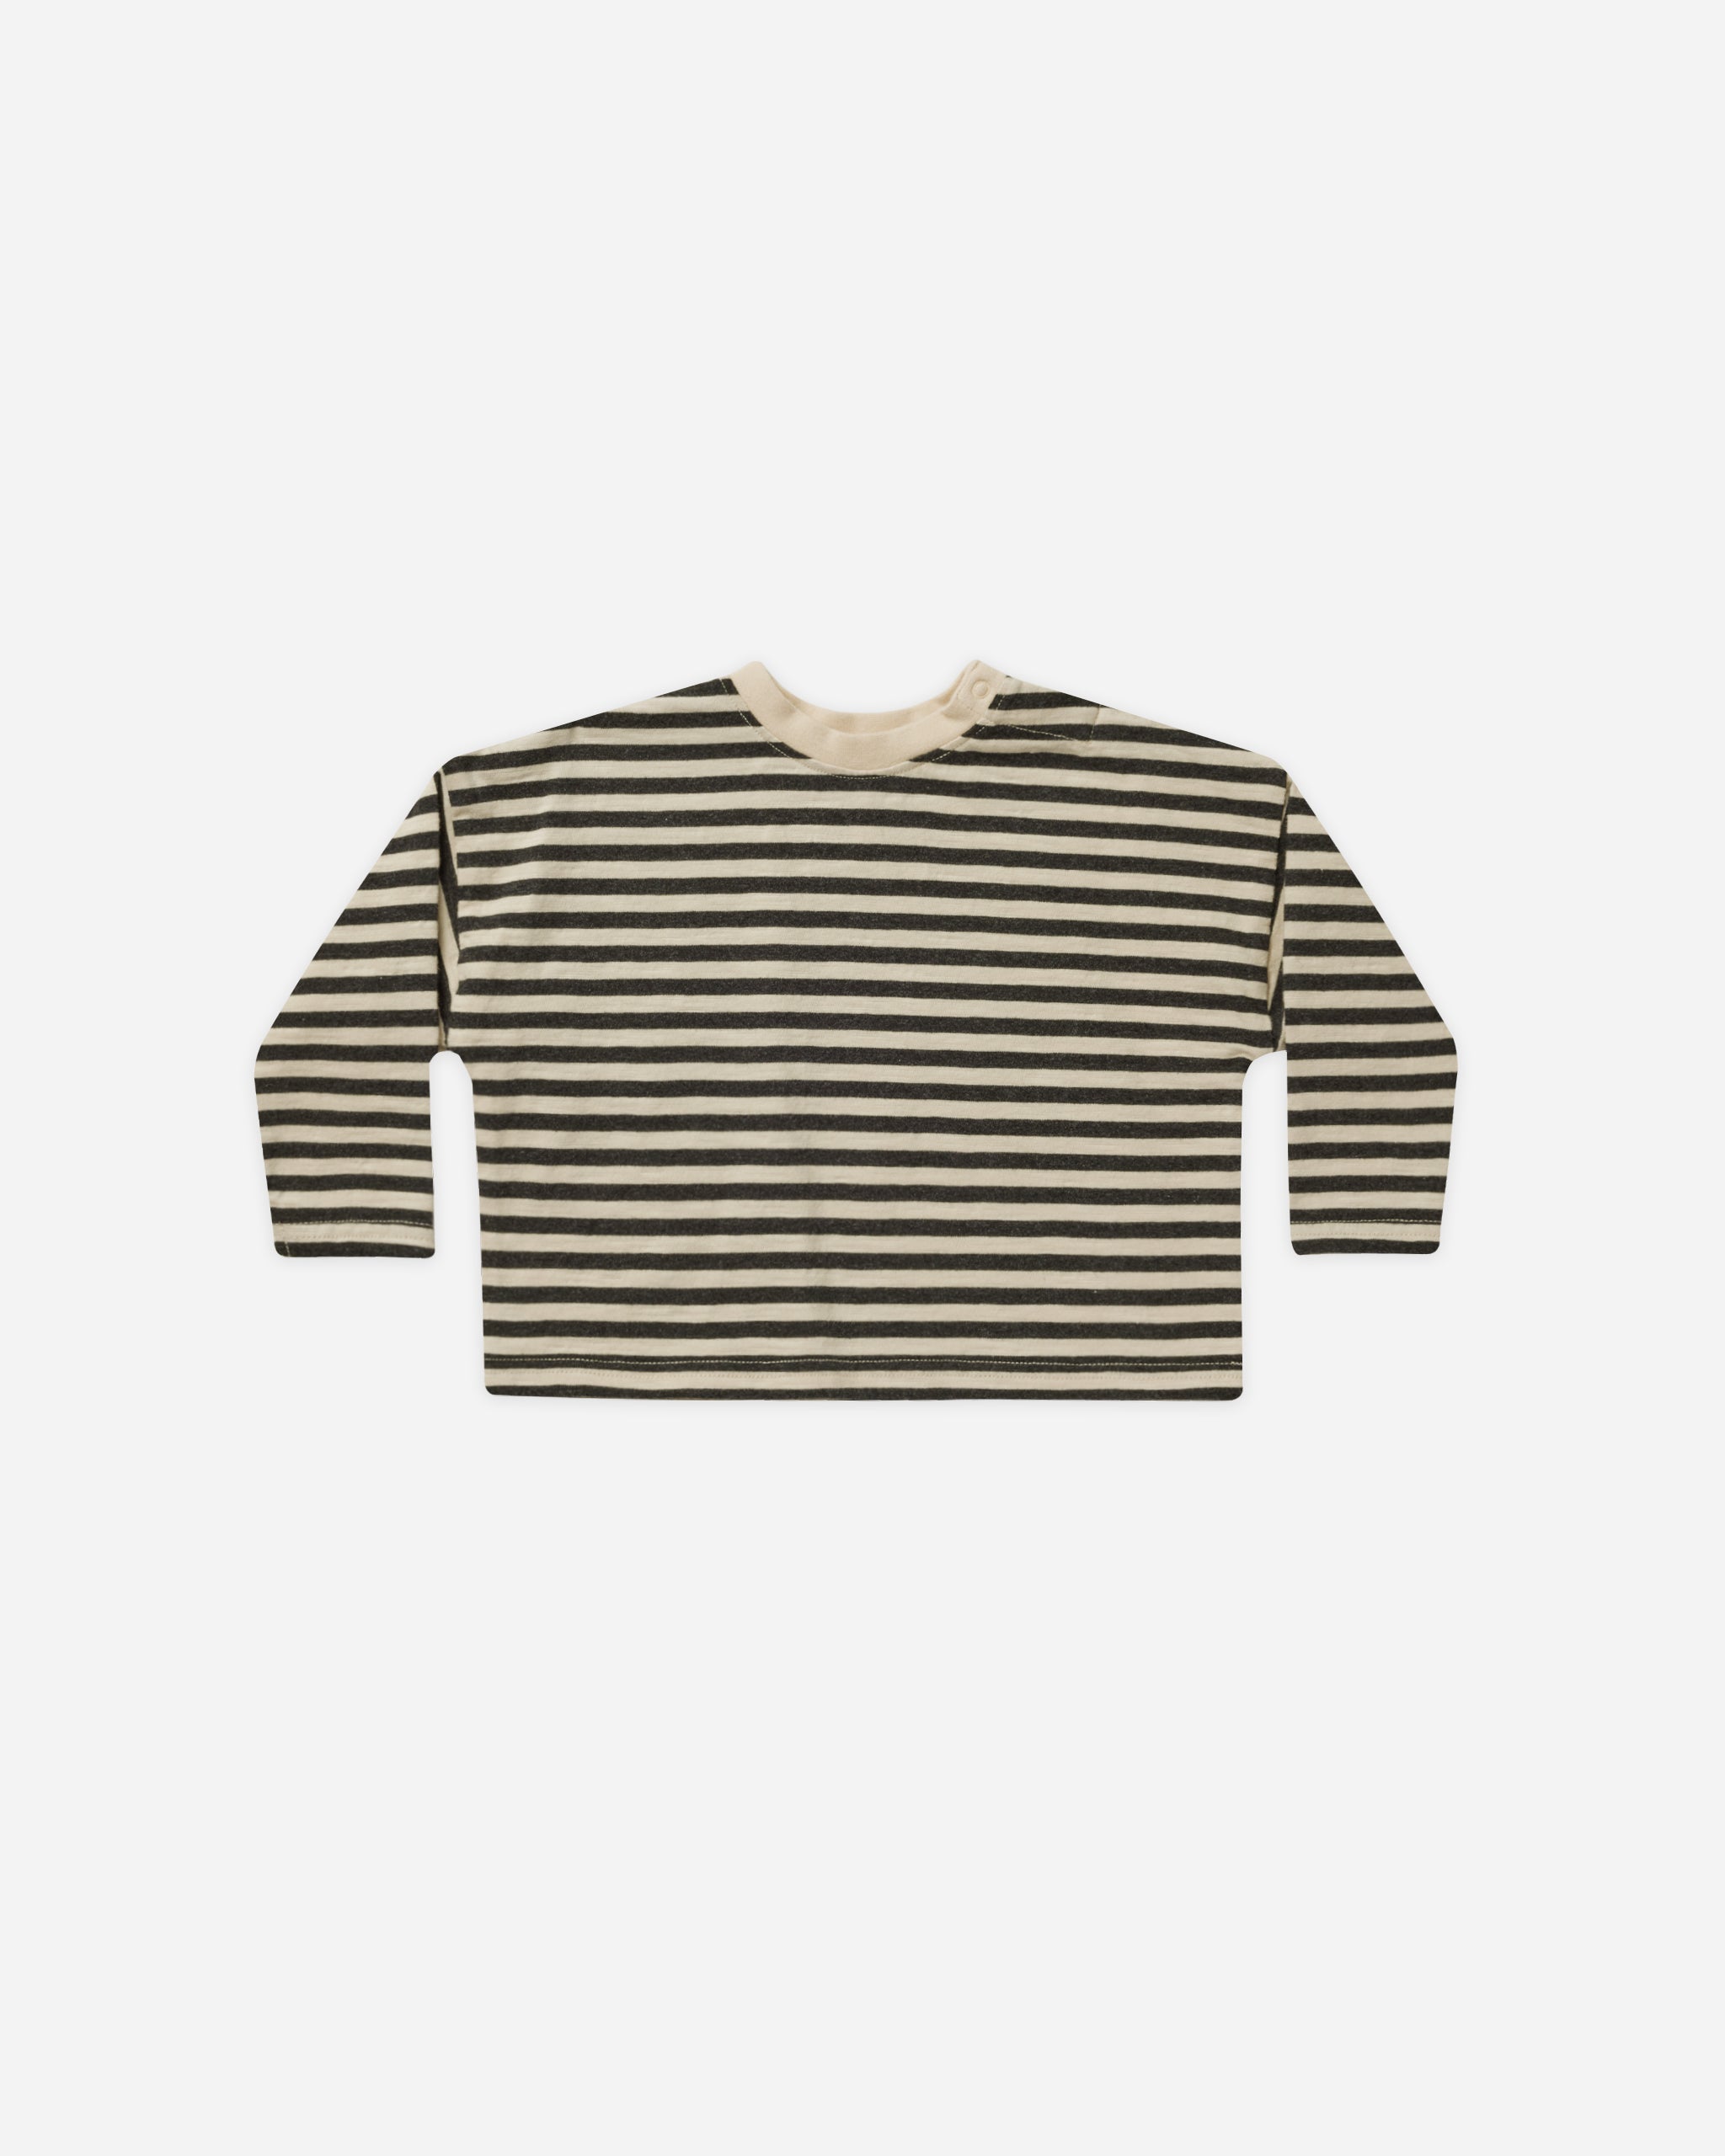 Camden Long Sleeve Tee || Black Stripe - Rylee + Cru | Kids Clothes | Trendy Baby Clothes | Modern Infant Outfits |